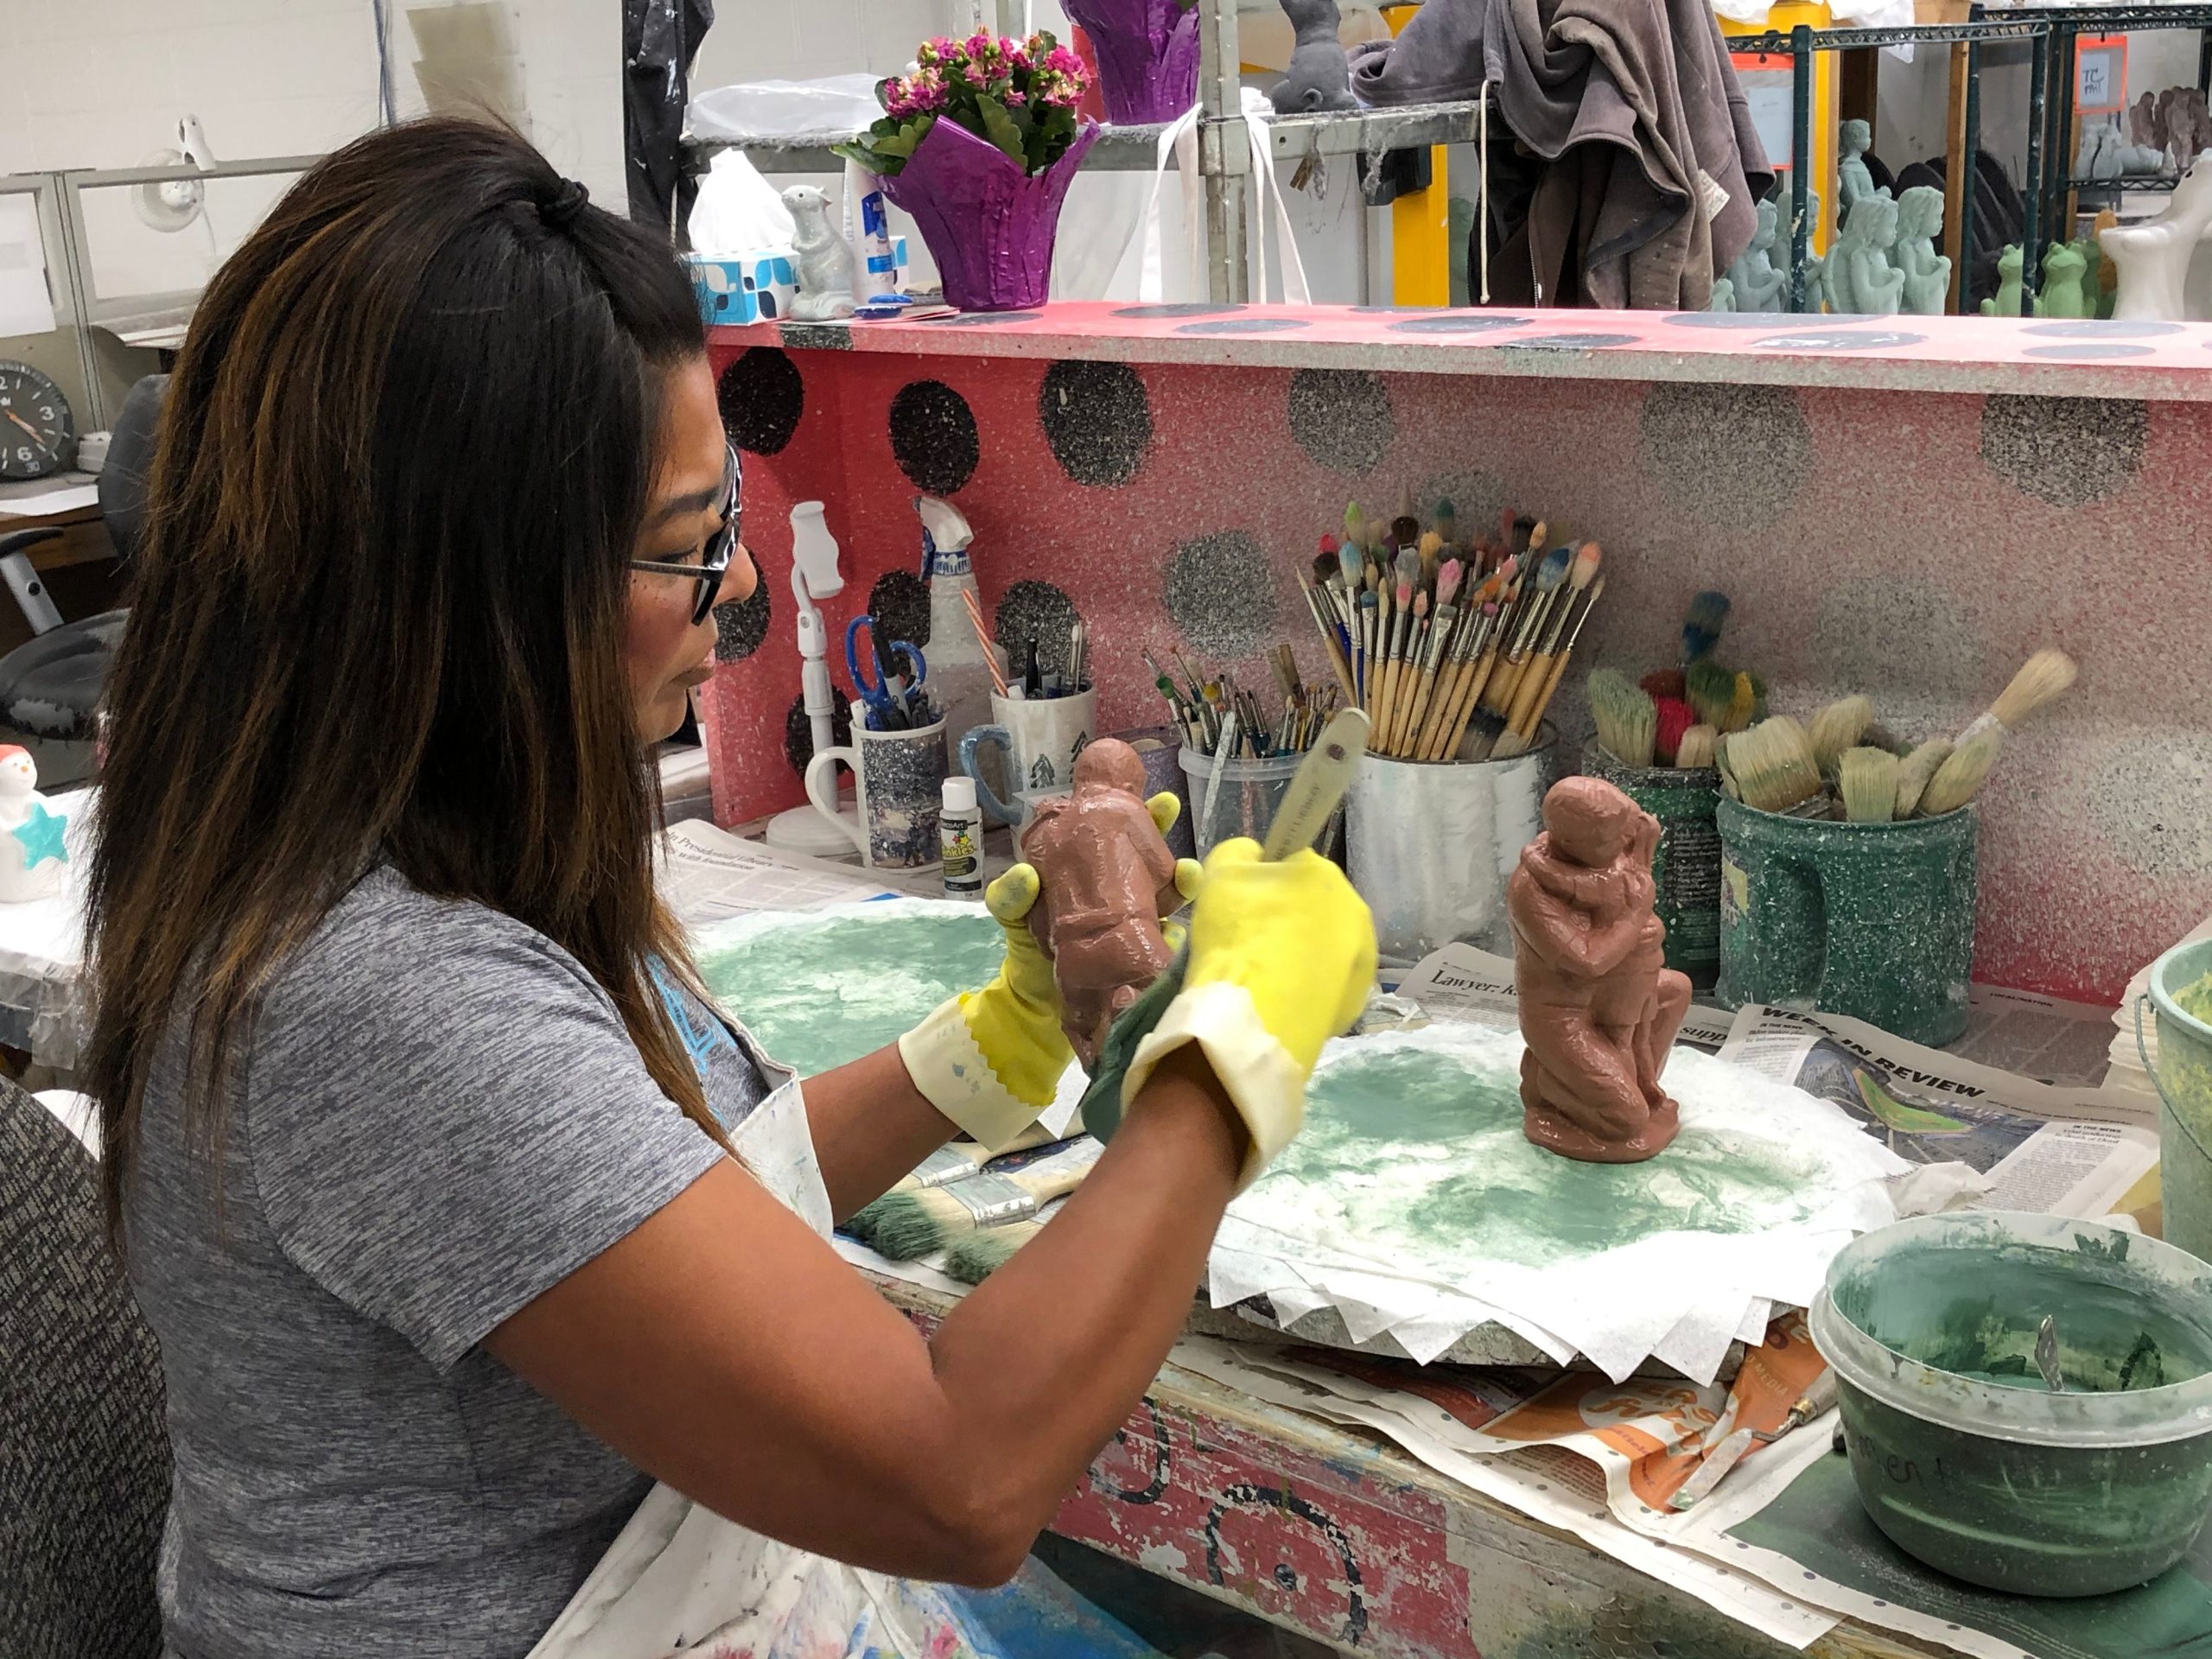 Tours of the Isabel Bloom Studio in davenport, Iowa afford visitors a close-up look at the creative process. (Randy Mink Photo)